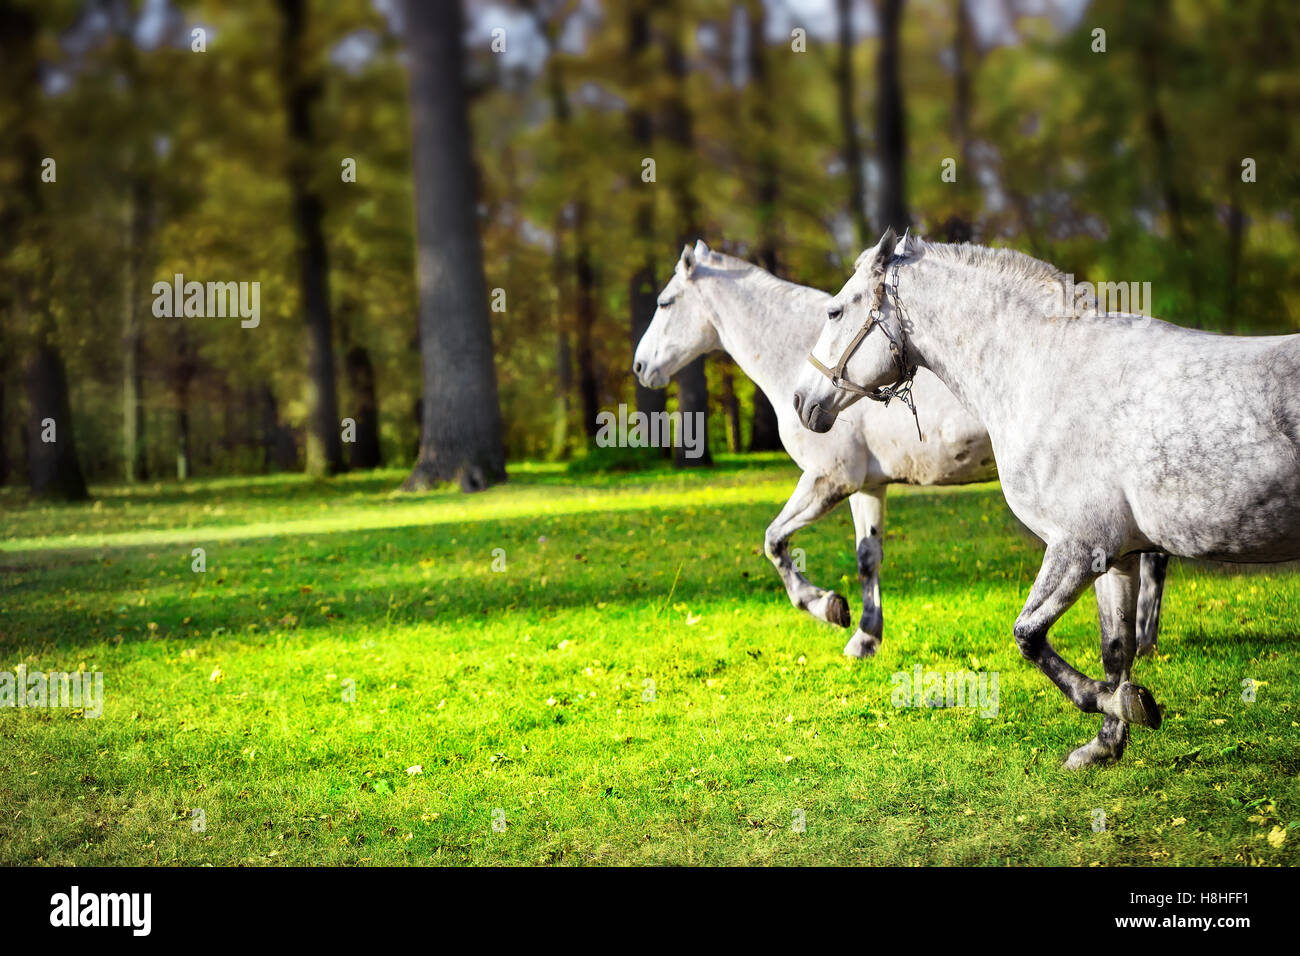 Two white horses running on lawn in the park Stock Photo